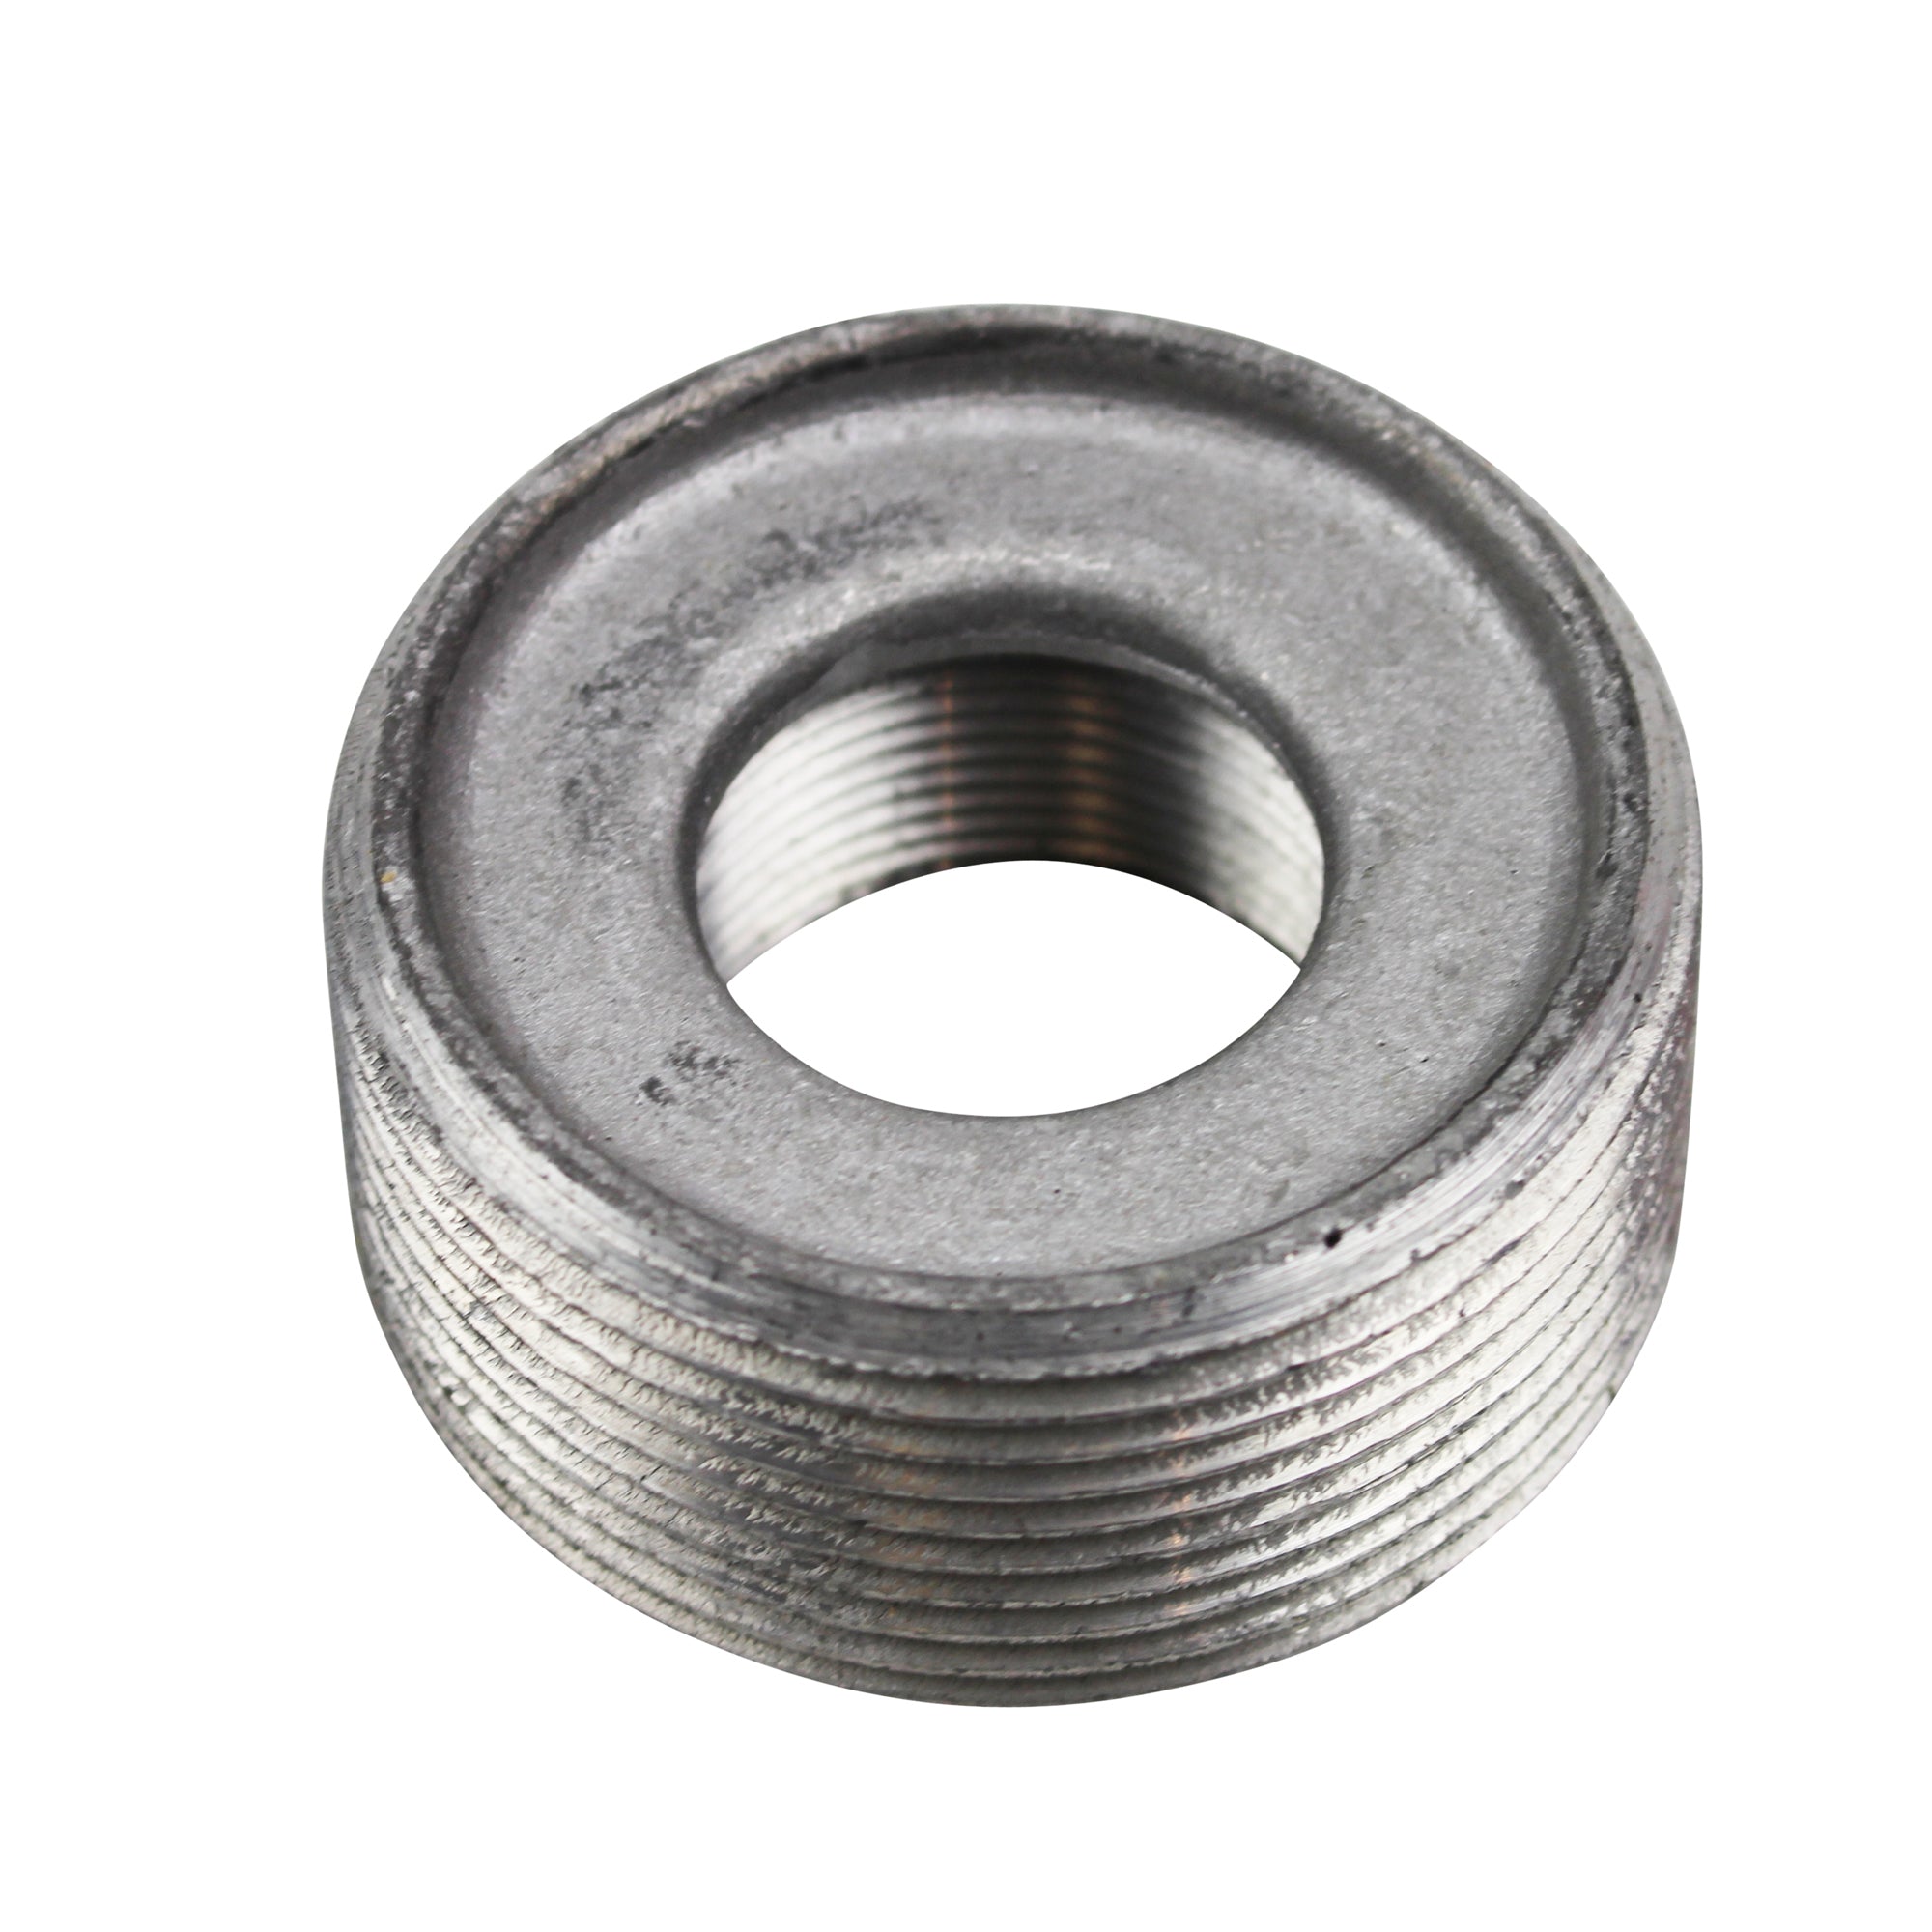 Crouse Hinds, COOPER CROUSE-HINDS RE74-SA CONDUIT REDUCING BUSHING, 1-1/4" X 2-1/2", (5 PACK)